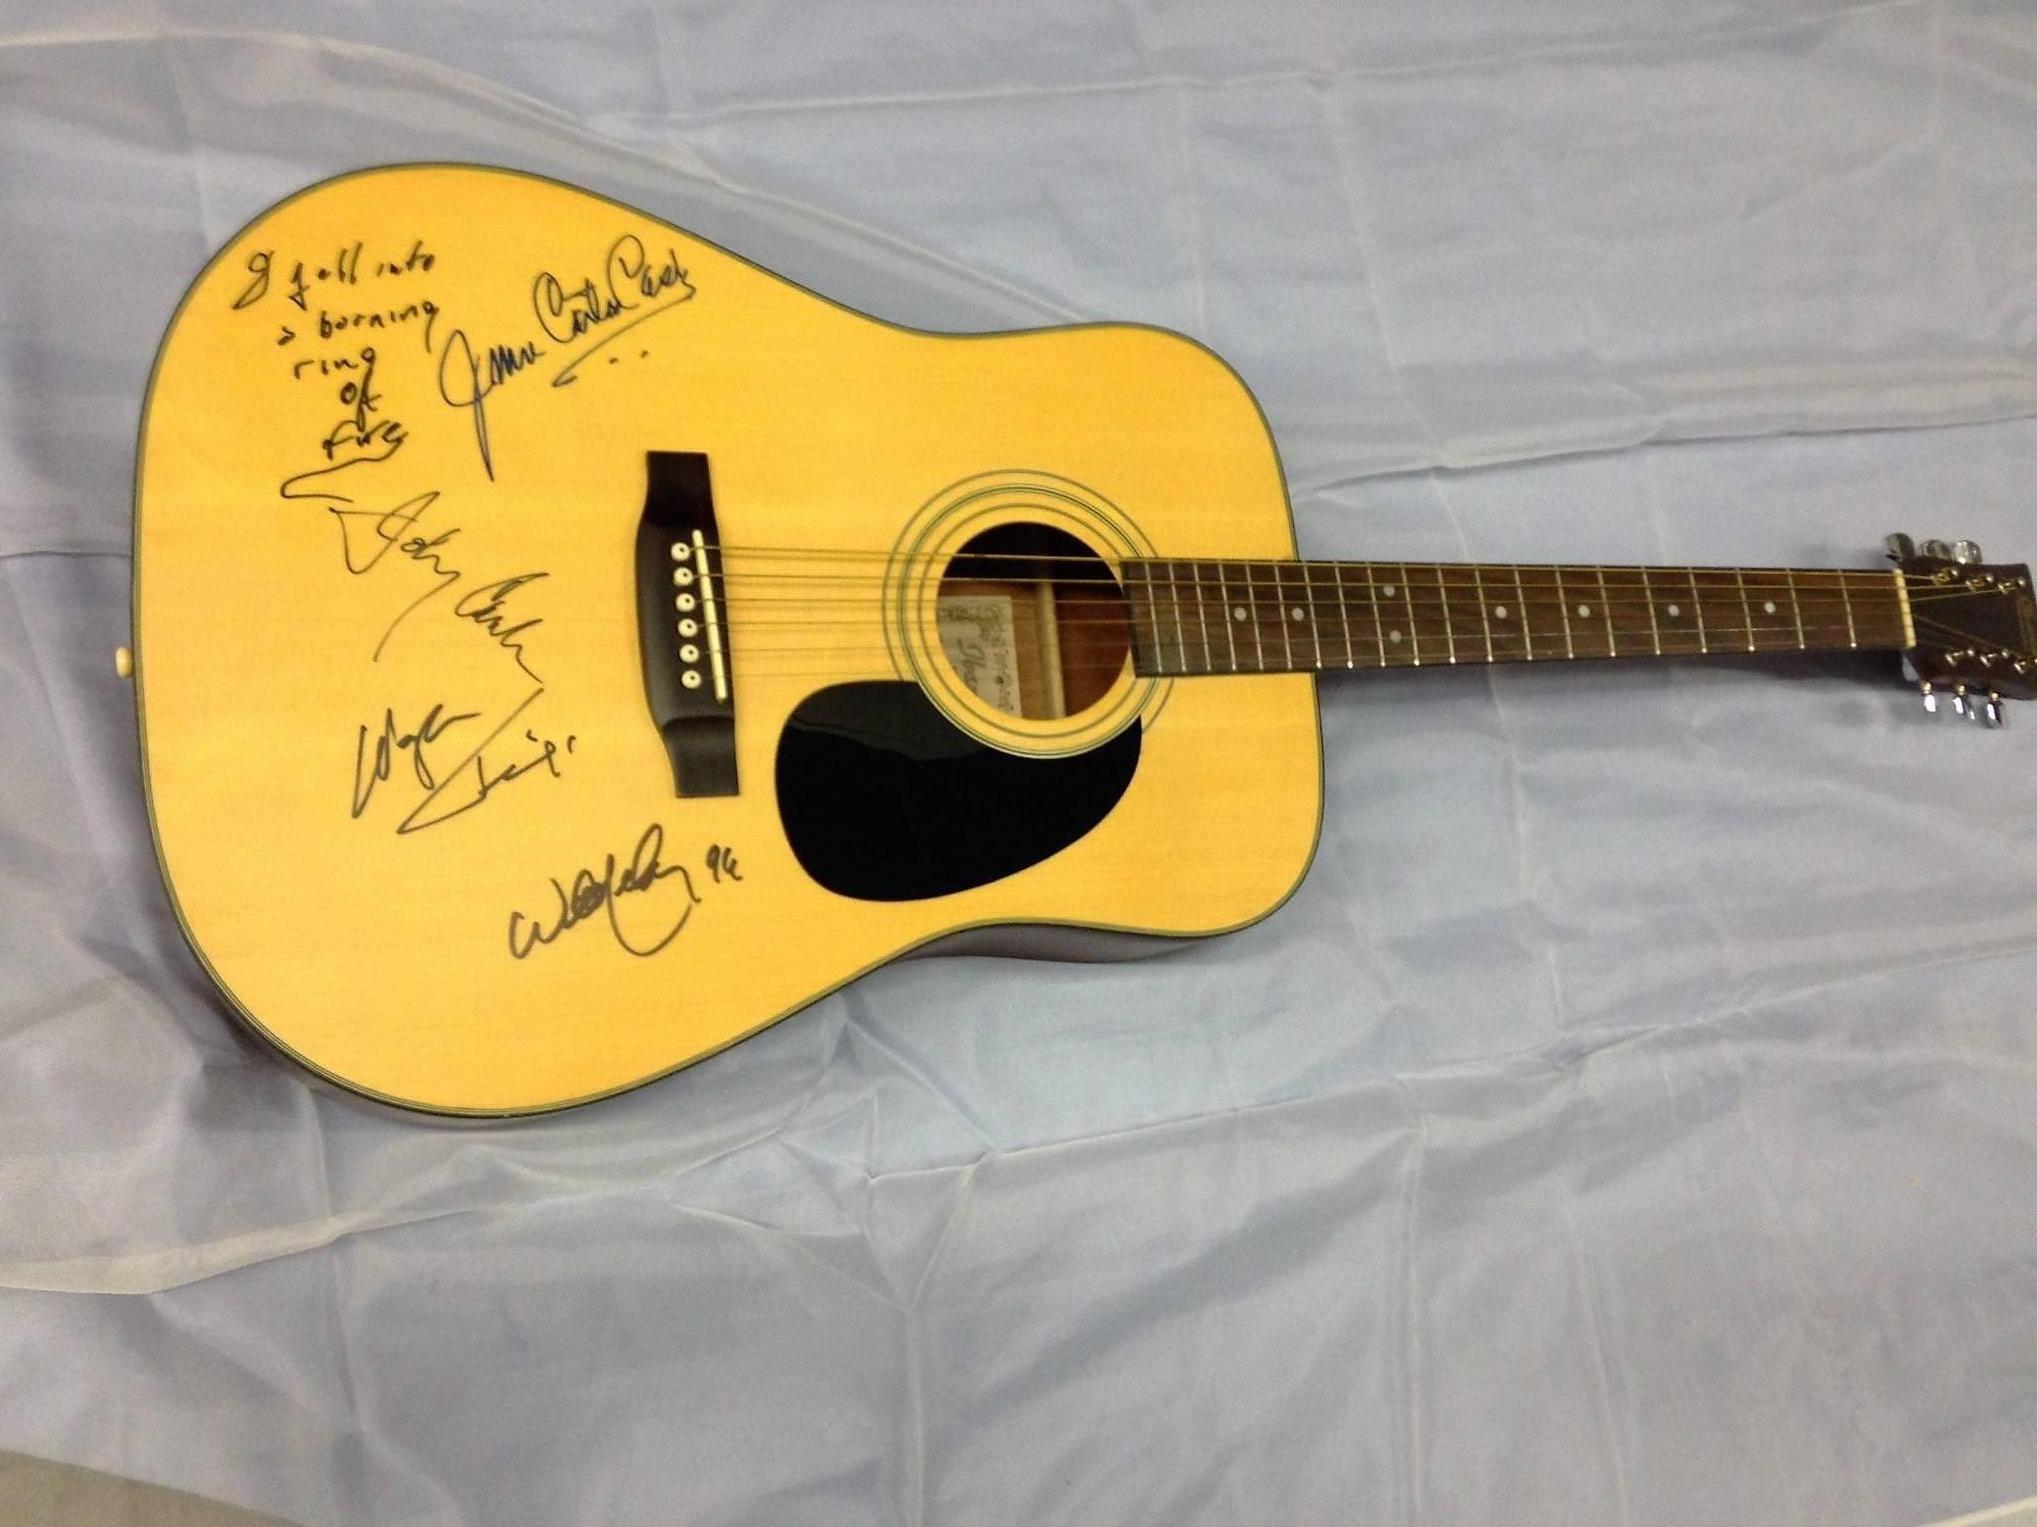 This guitar is autographed by Johnny Cash, June Carter Cash. Waylon Jennings and Willie Nelson. Johnny Cash inscribed 'I Fell Into A Burning Ring Of Fire'. All Autographs were obtained in person by the seller, circa 1994. This guitar is an Ibanez